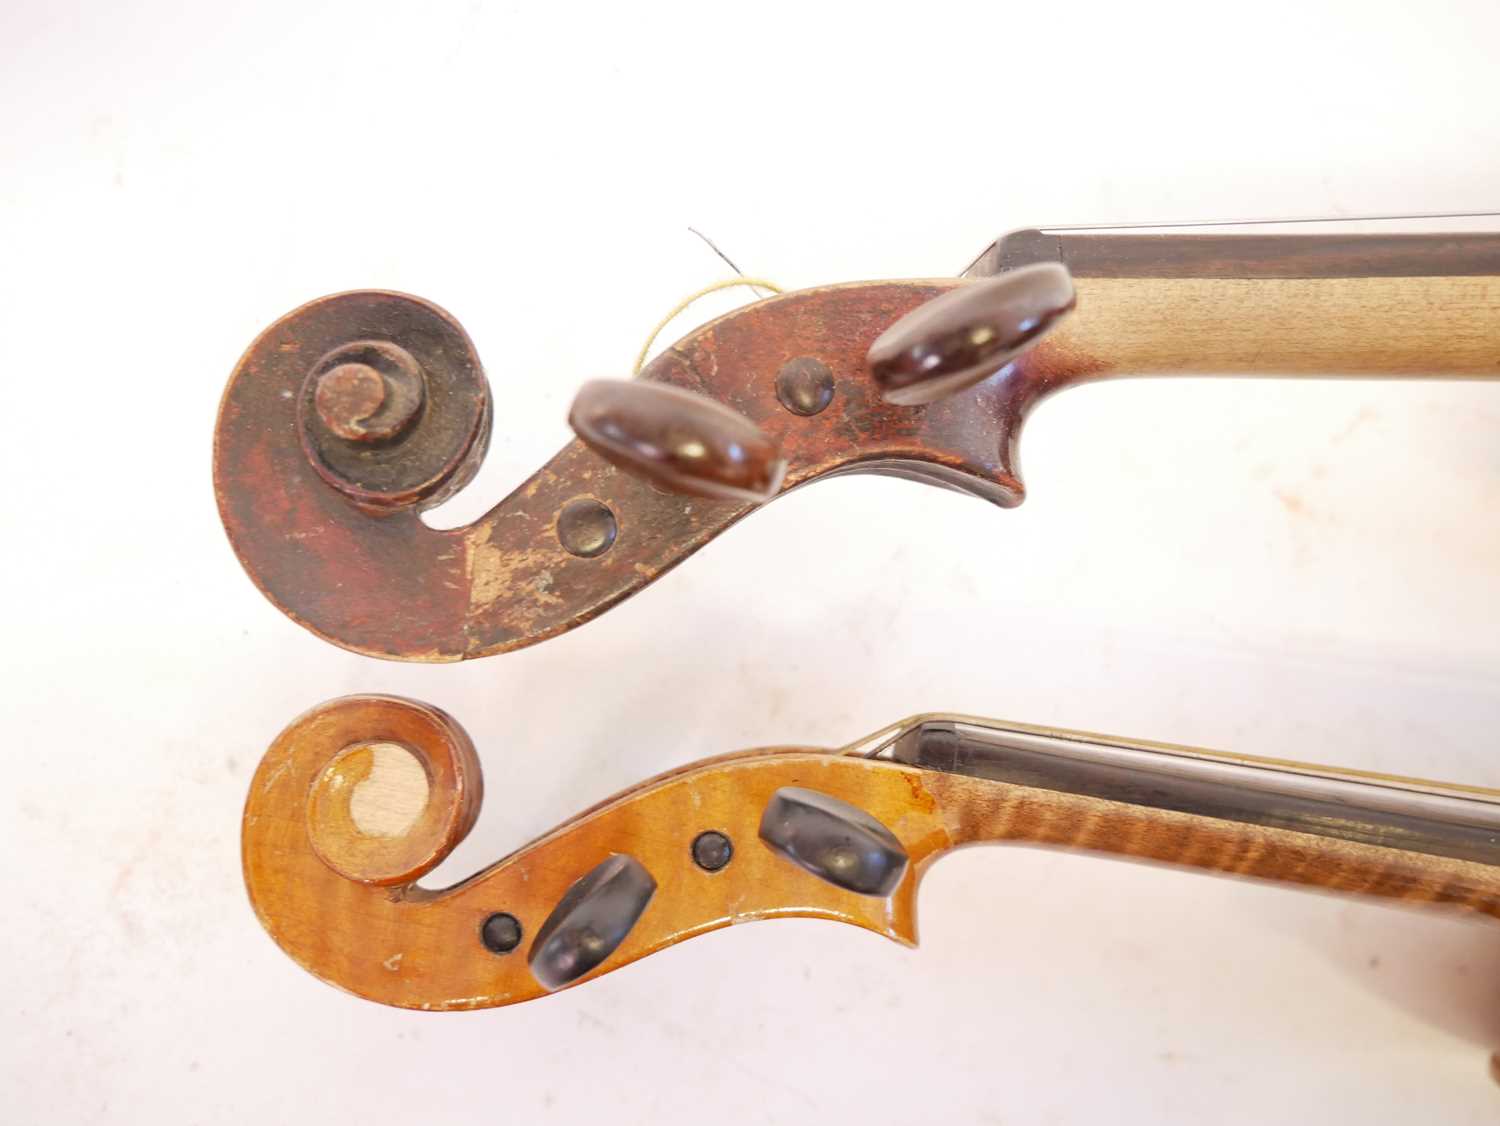 4/4 violin and a 1/2 size violin, each with a bow and case. - Image 3 of 7